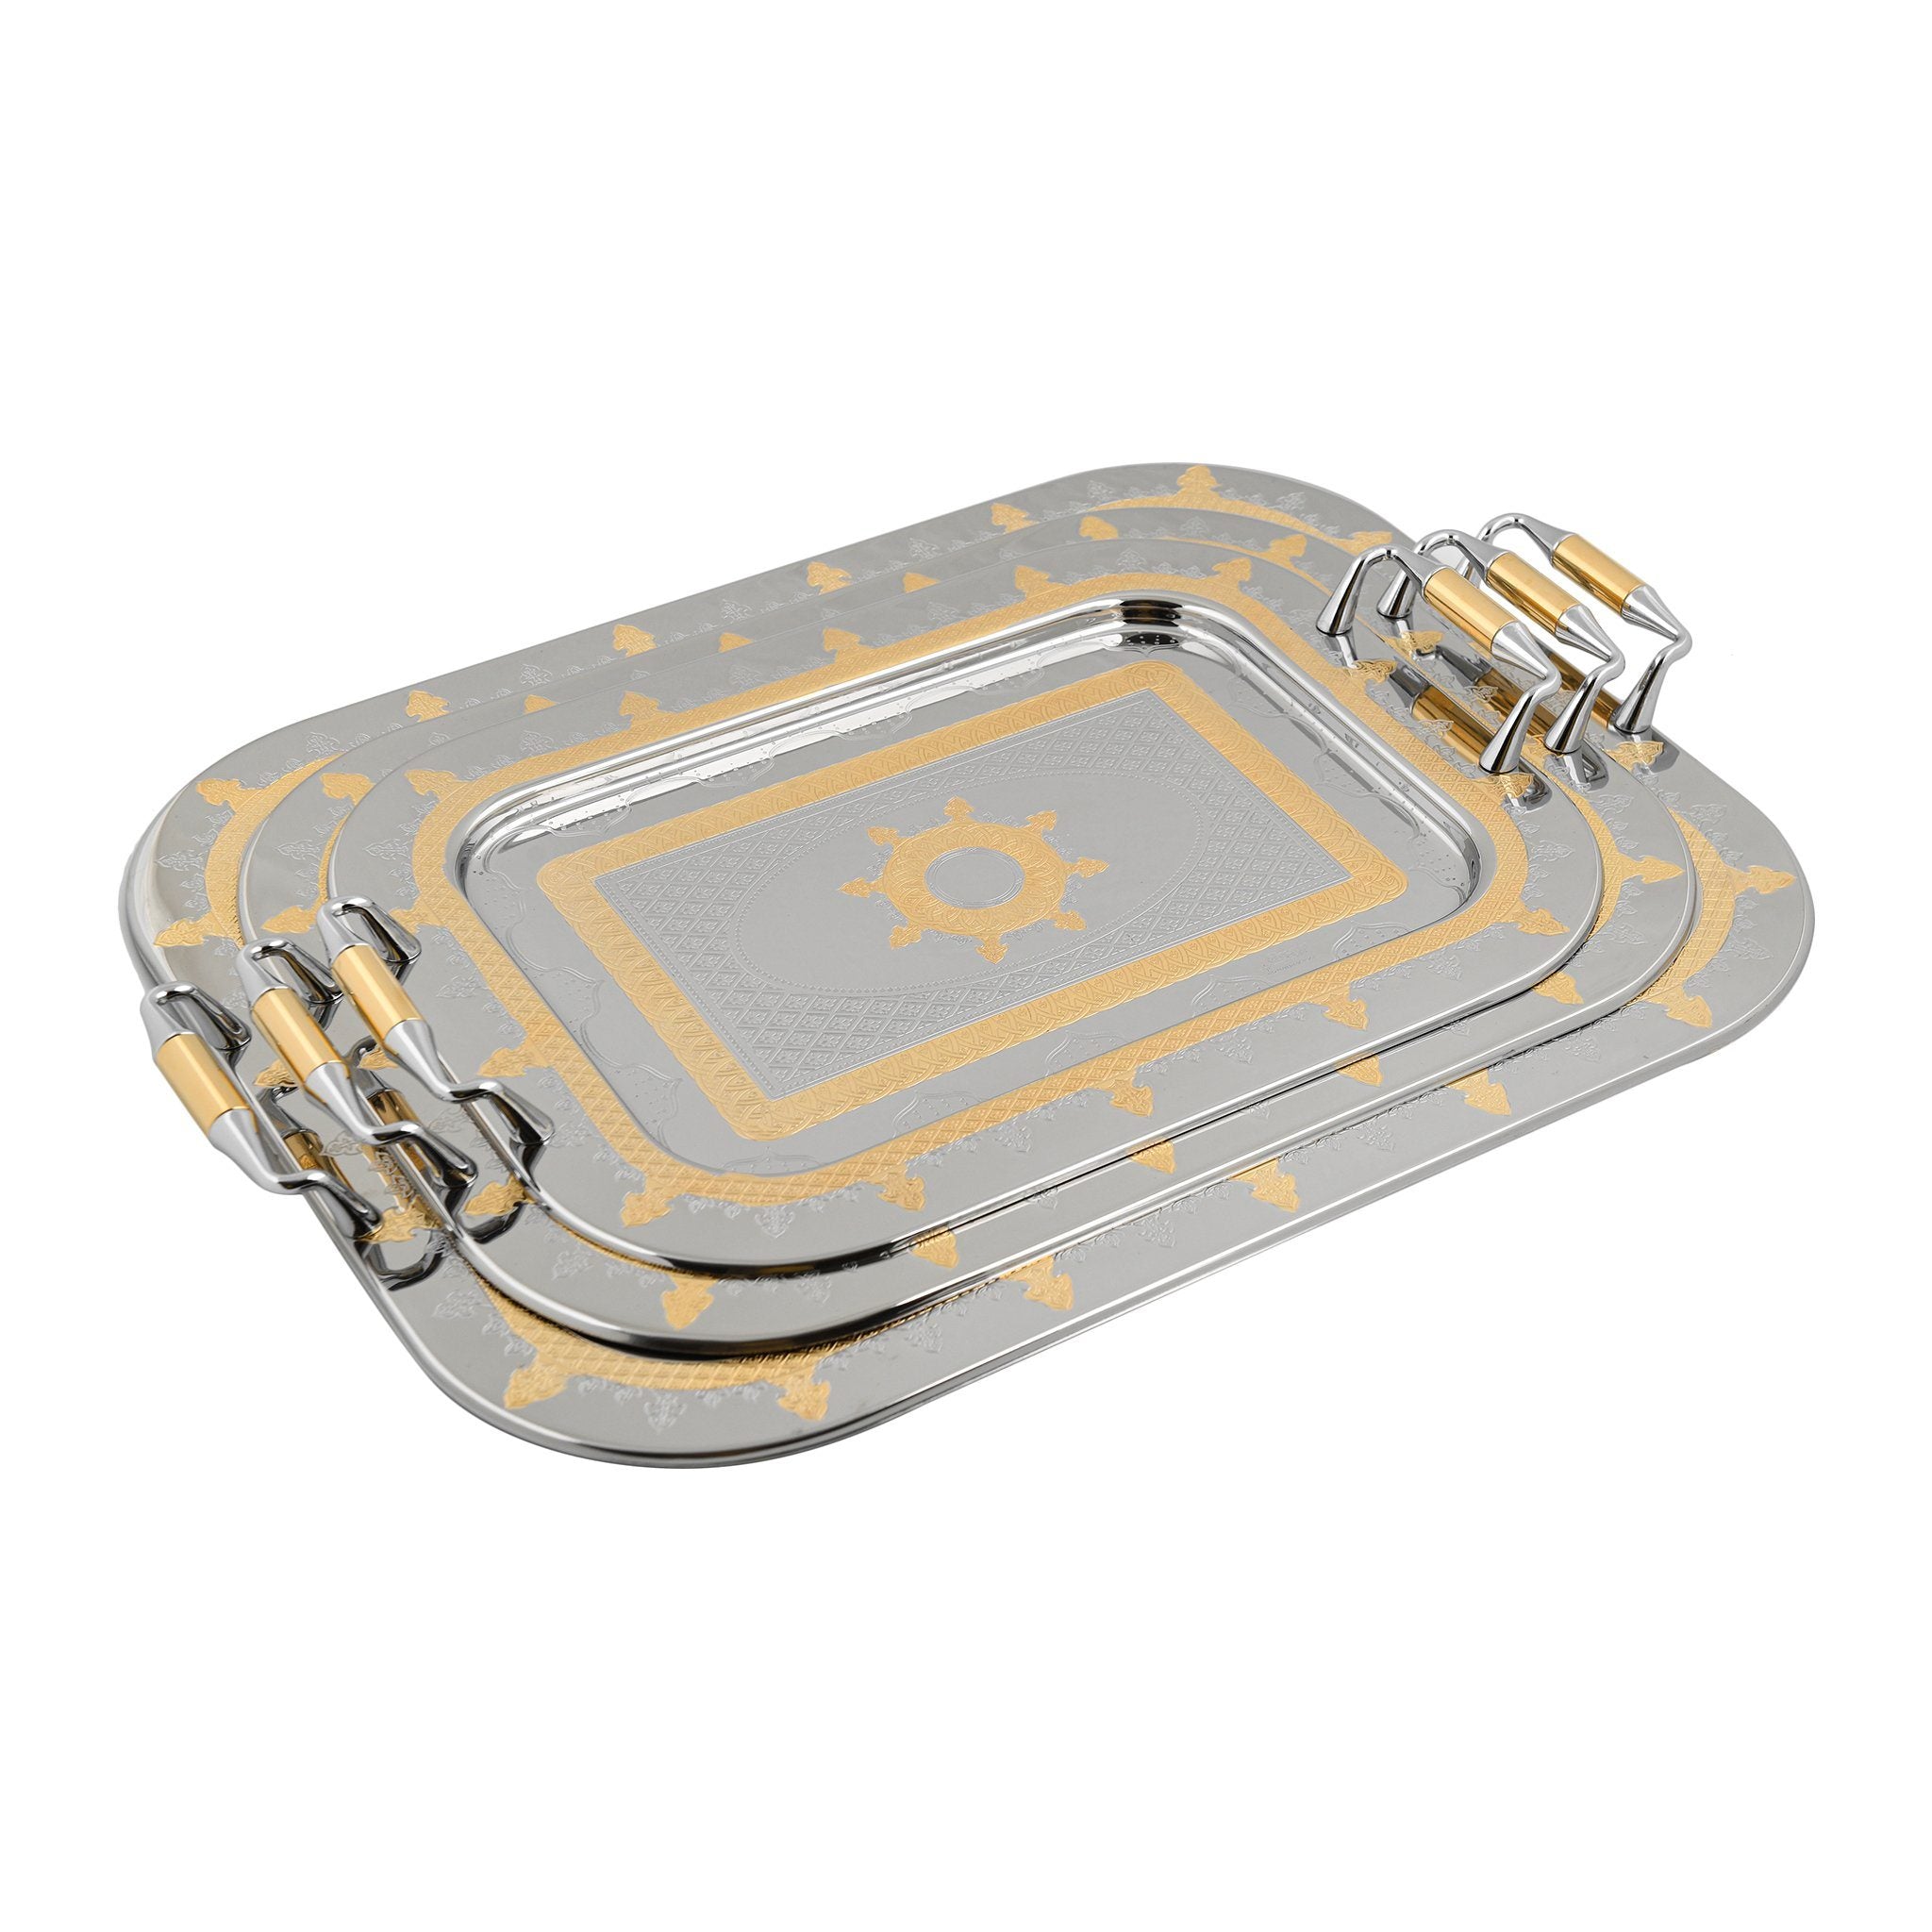 Elegant Gioiel - Rectangular Tray Set with Handles 3 Pieces - Gold - Stainless Steel 18/10 - 7500080